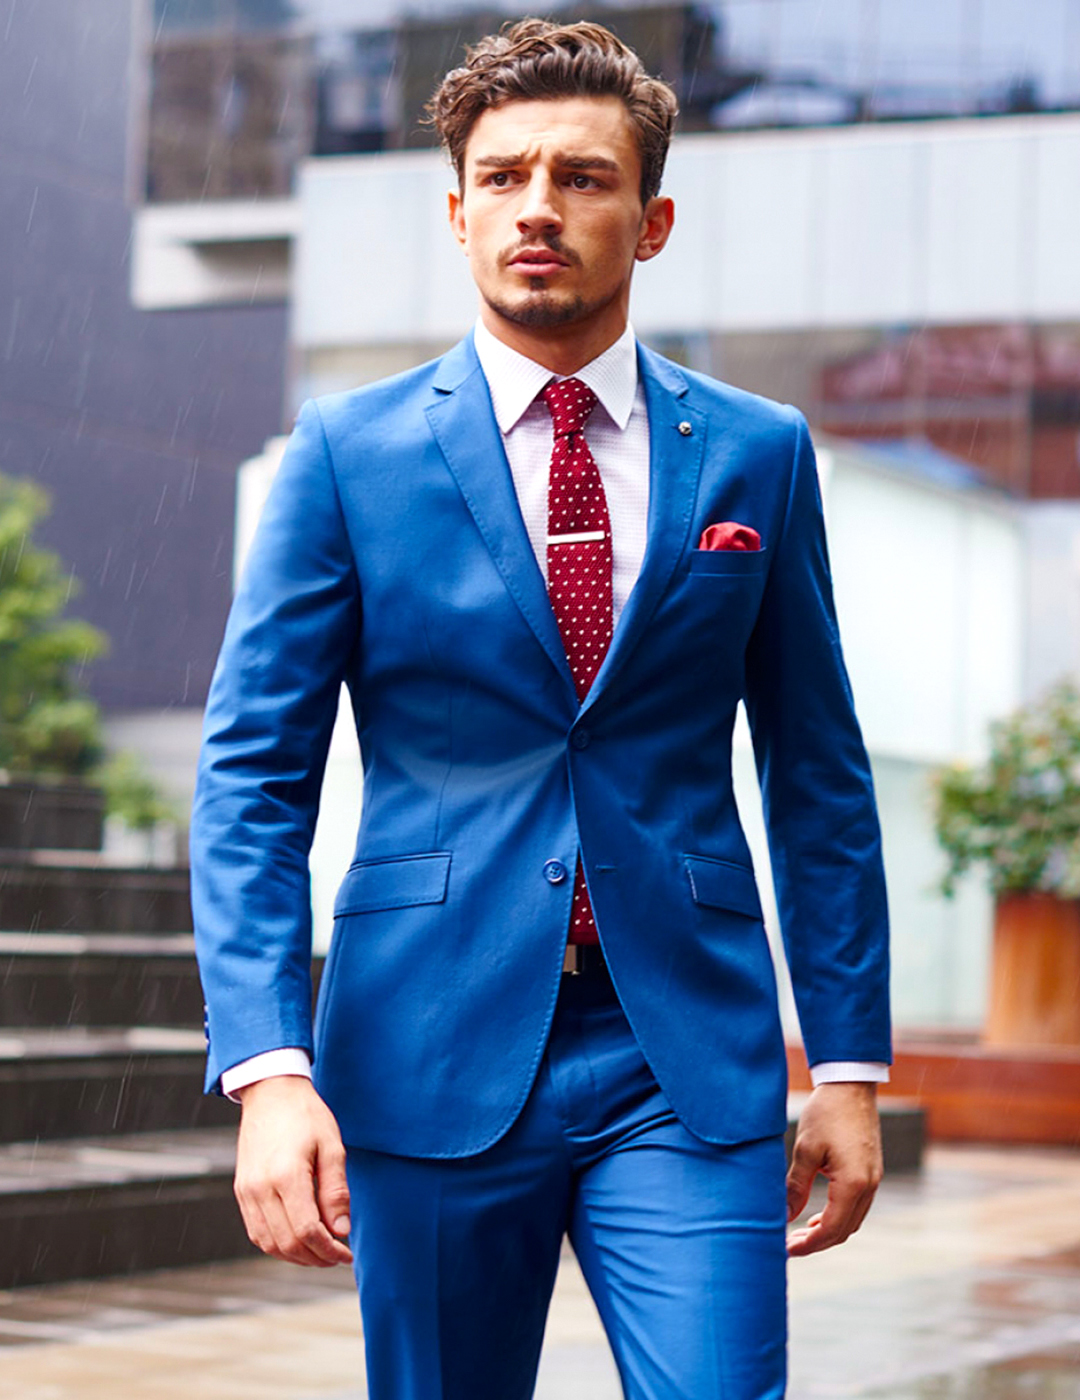 Blue suit, white dress shirt, and red tie